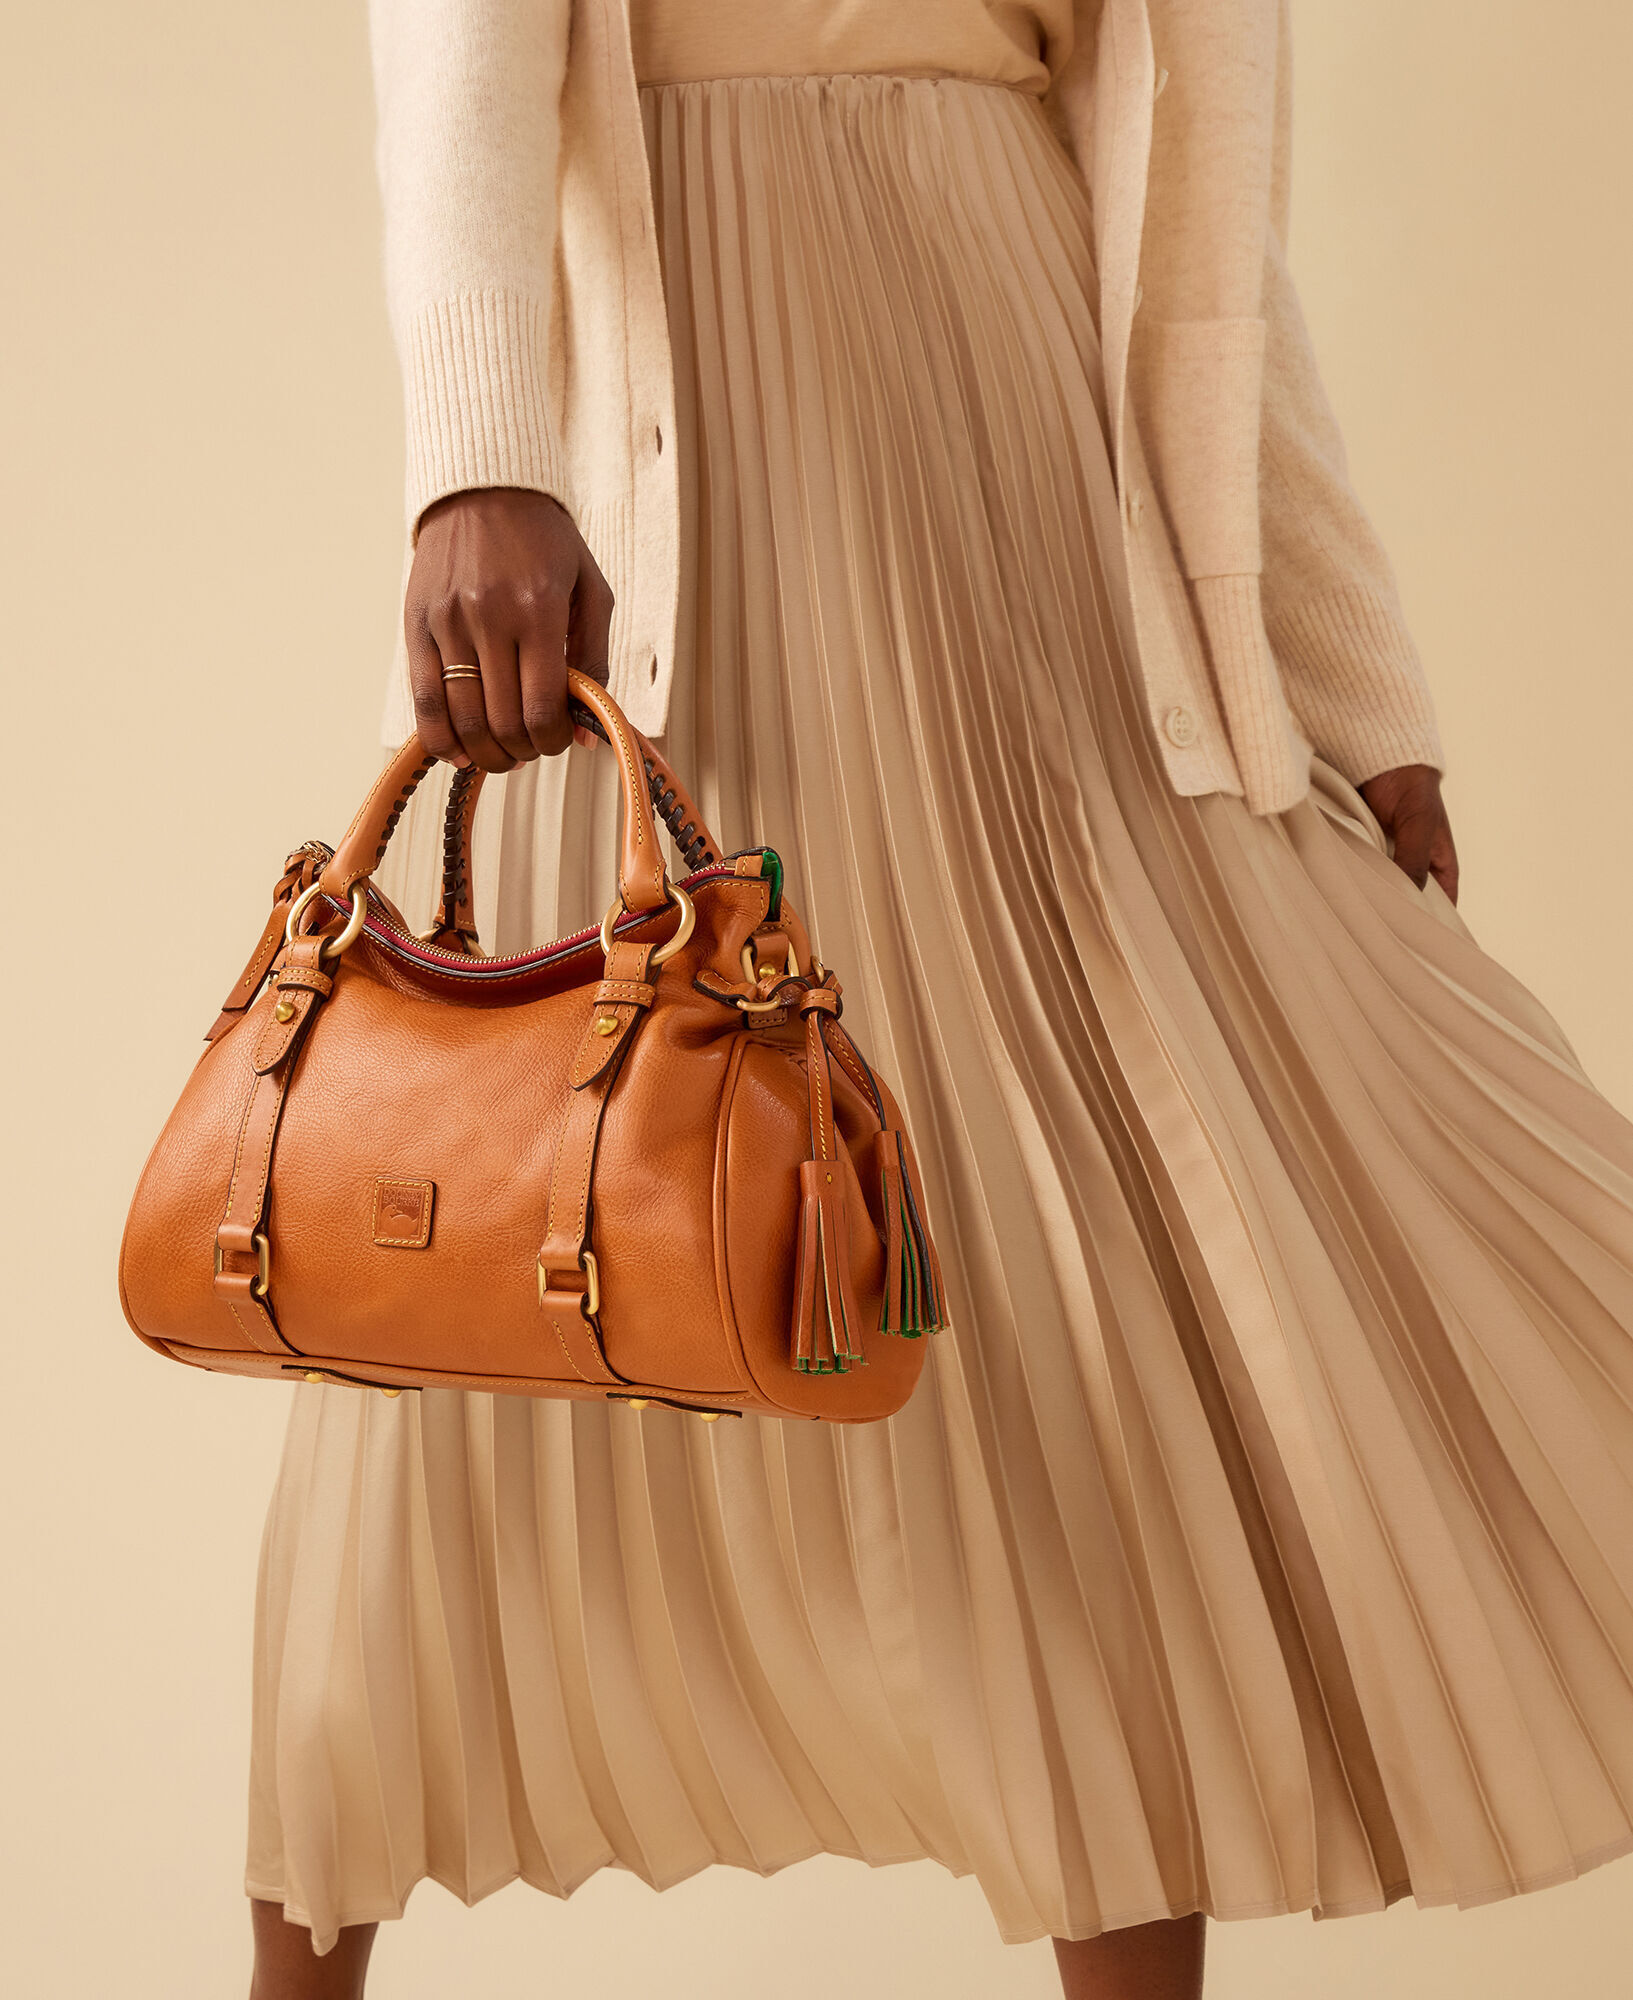 Dooney and Bourke: Discover Our Newest Florentine Satchels